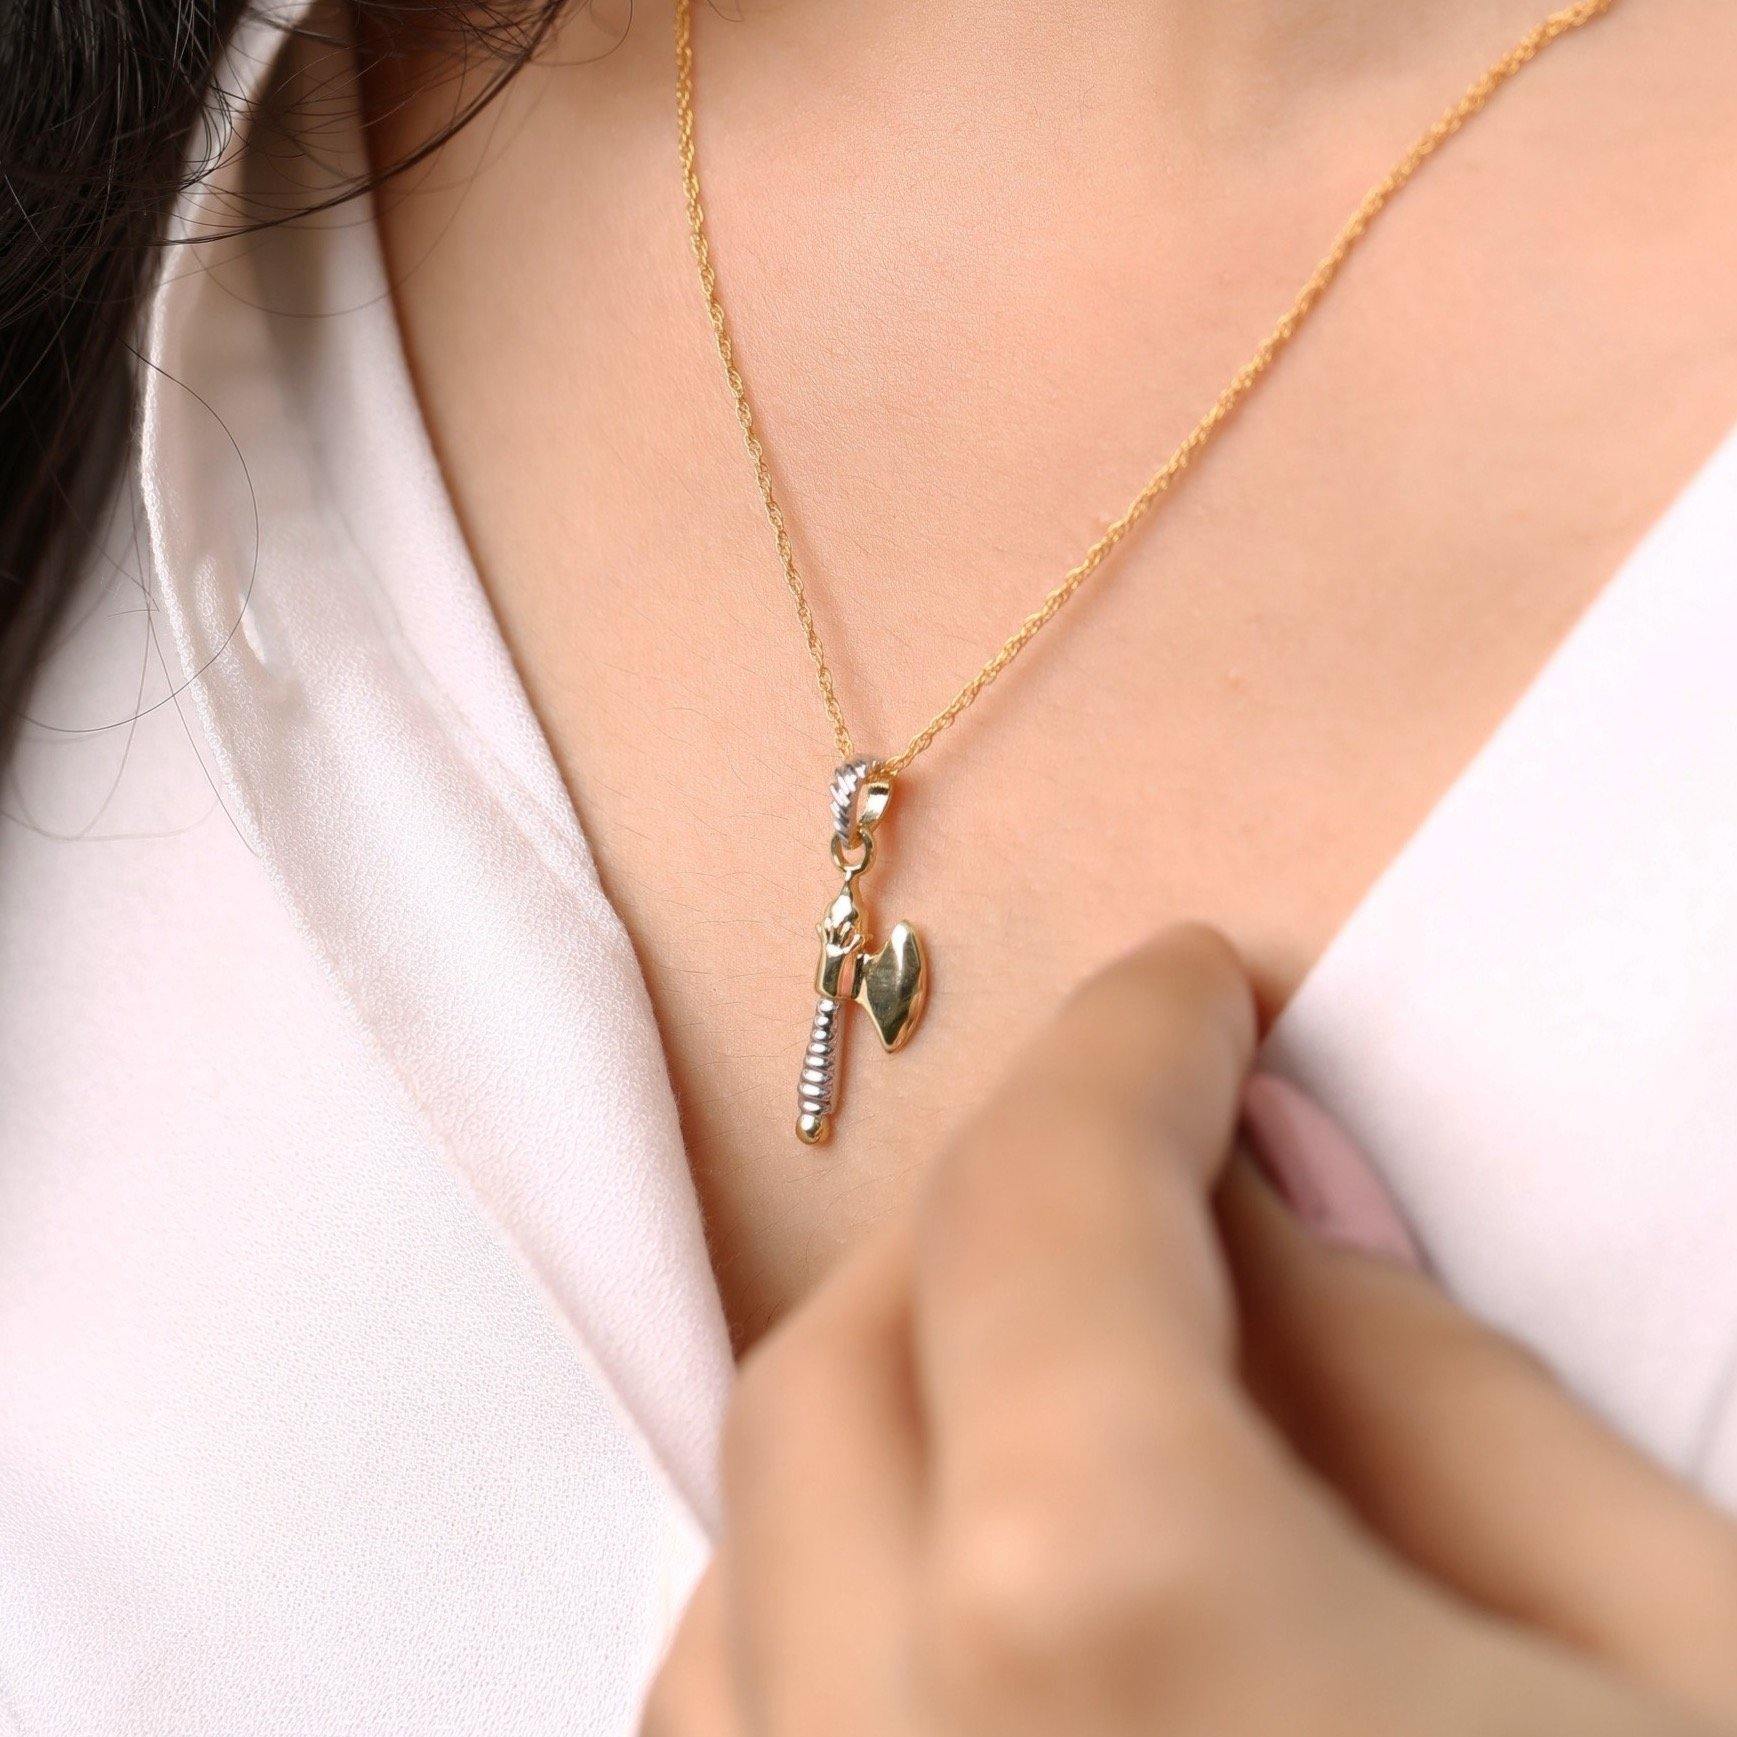 The Dainty Cleaver Pendant.